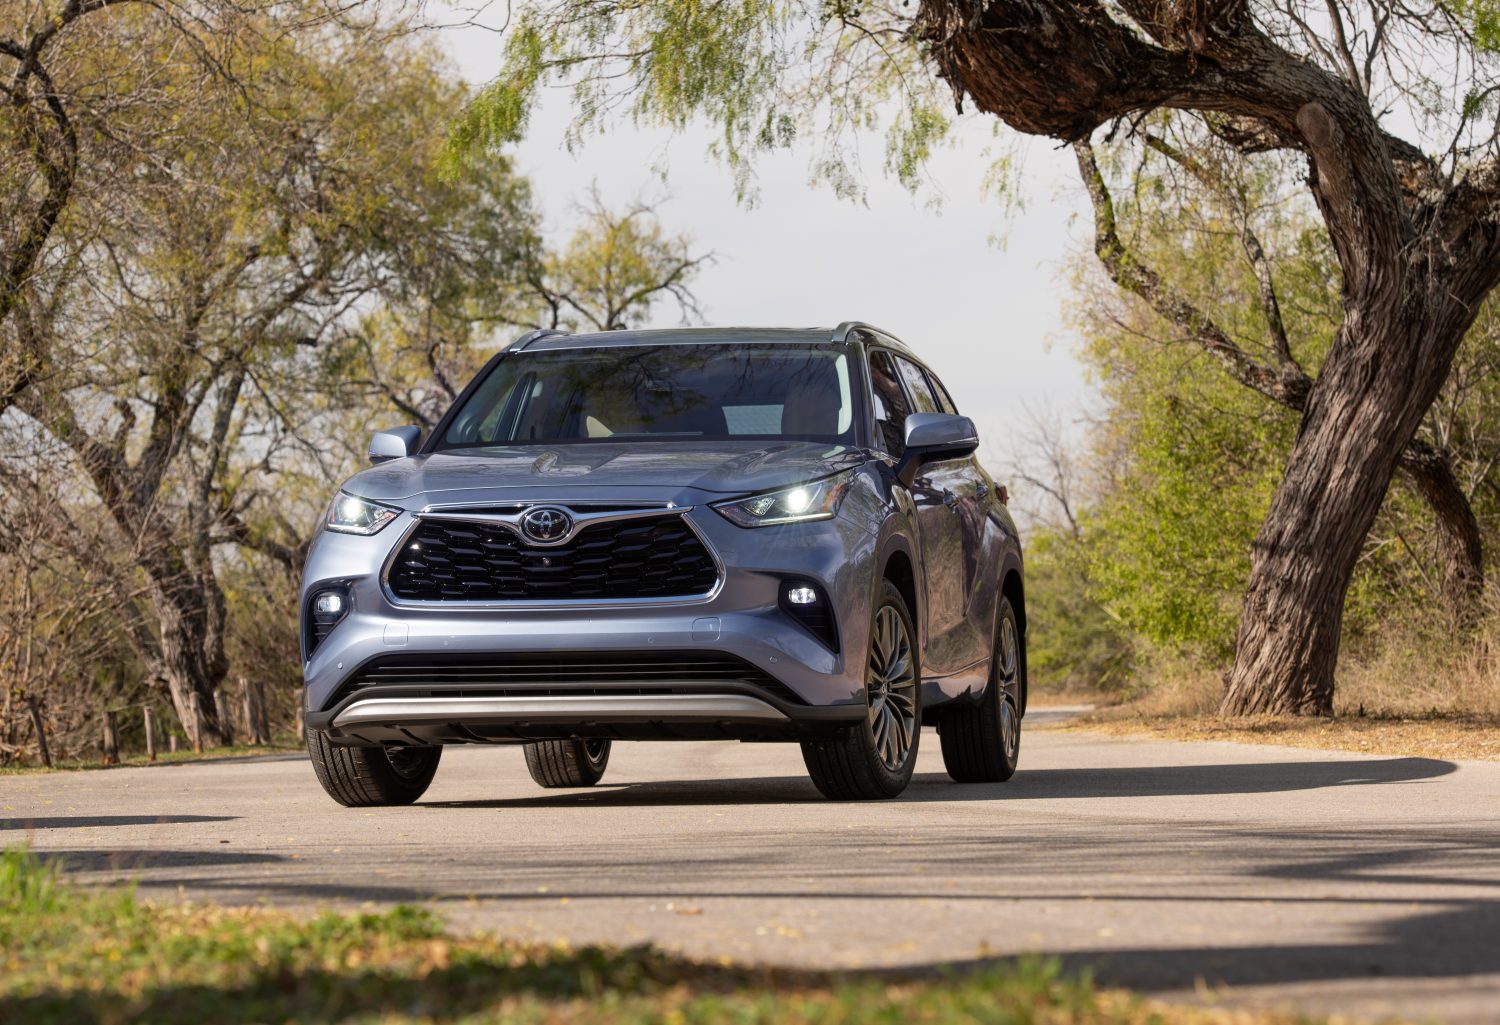 You can view the exterior and interior of the 2020 Toyota Highlander Platinum AWD in the Moon Dust color on YouTube